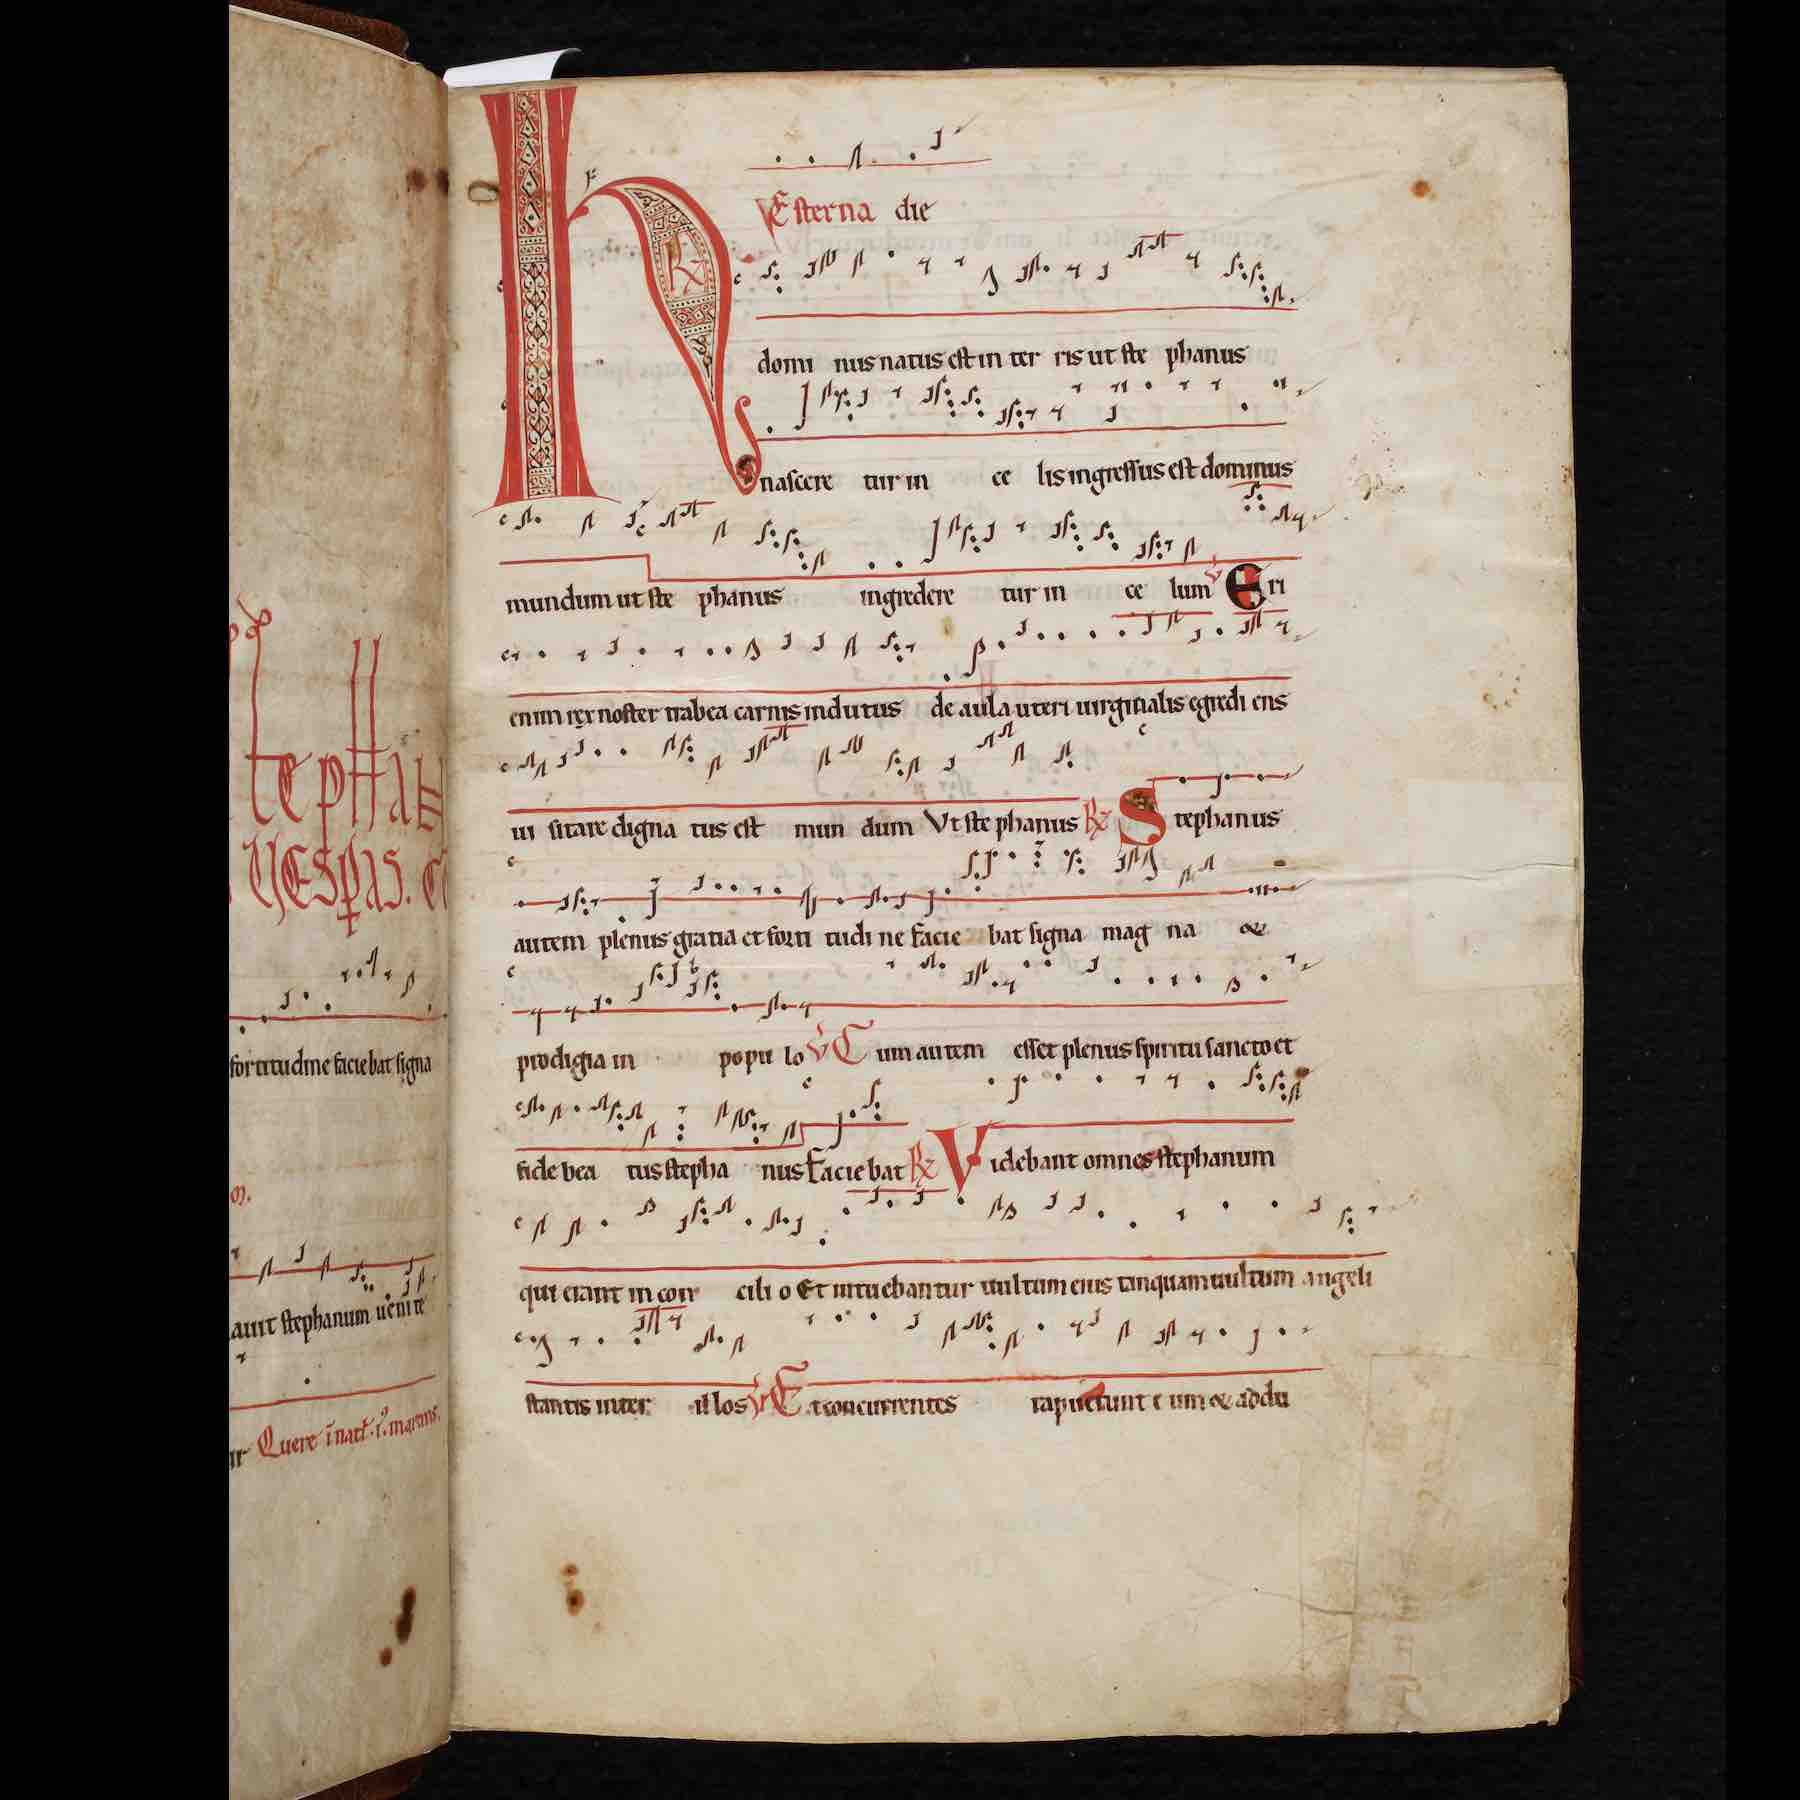 12th-c. French Cistercian Antiphonary, Abbey of Our Lady of Gethsemani, Kentucky. (<a href='https://w3id.org/vhmml/readingRoom/view/500922'>AGOC 1</a>)